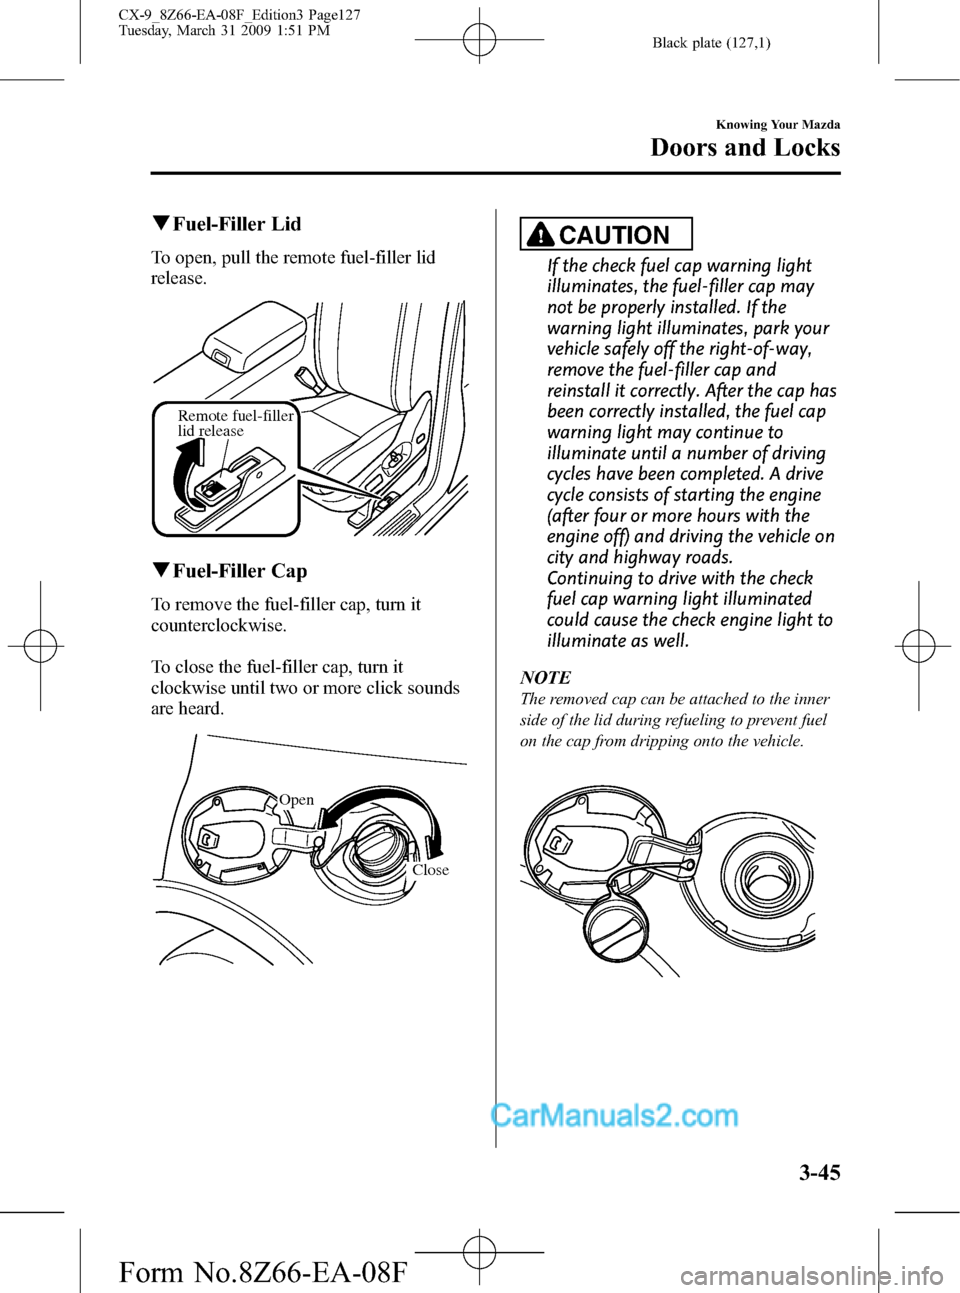 MAZDA MODEL CX-9 2009  Owners Manual (in English) Black plate (127,1)
qFuel-Filler Lid
To open, pull the remote fuel-filler lid
release.
Remote fuel-filler 
lid release
qFuel-Filler Cap
To remove the fuel-filler cap, turn it
counterclockwise.
To clos